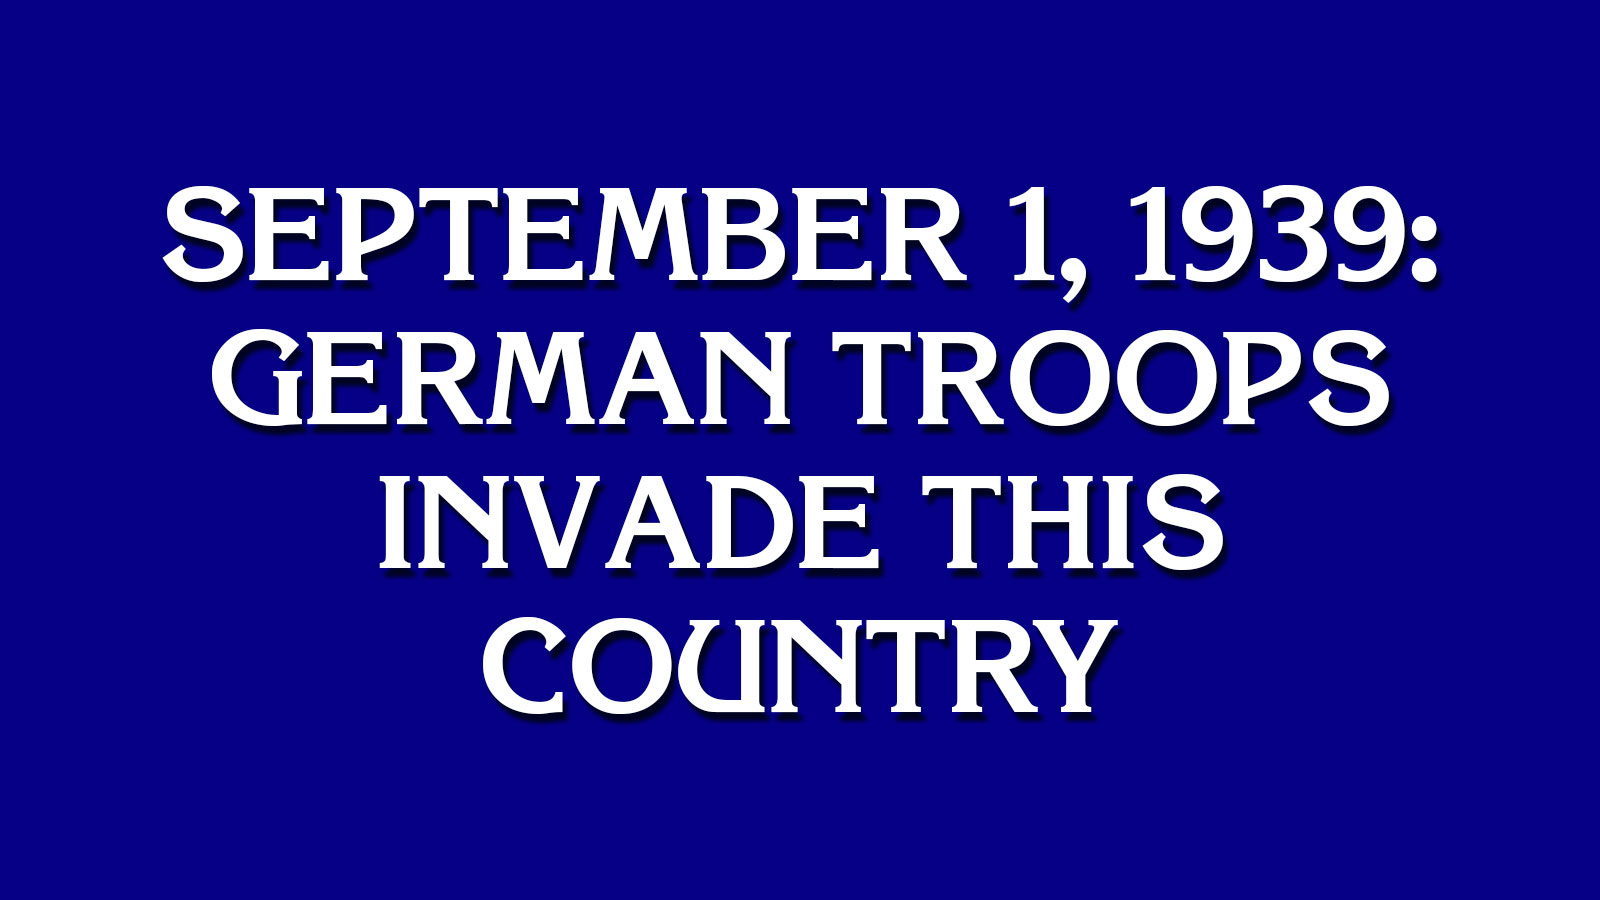 Can You Go on “Jeopardy!”? 142